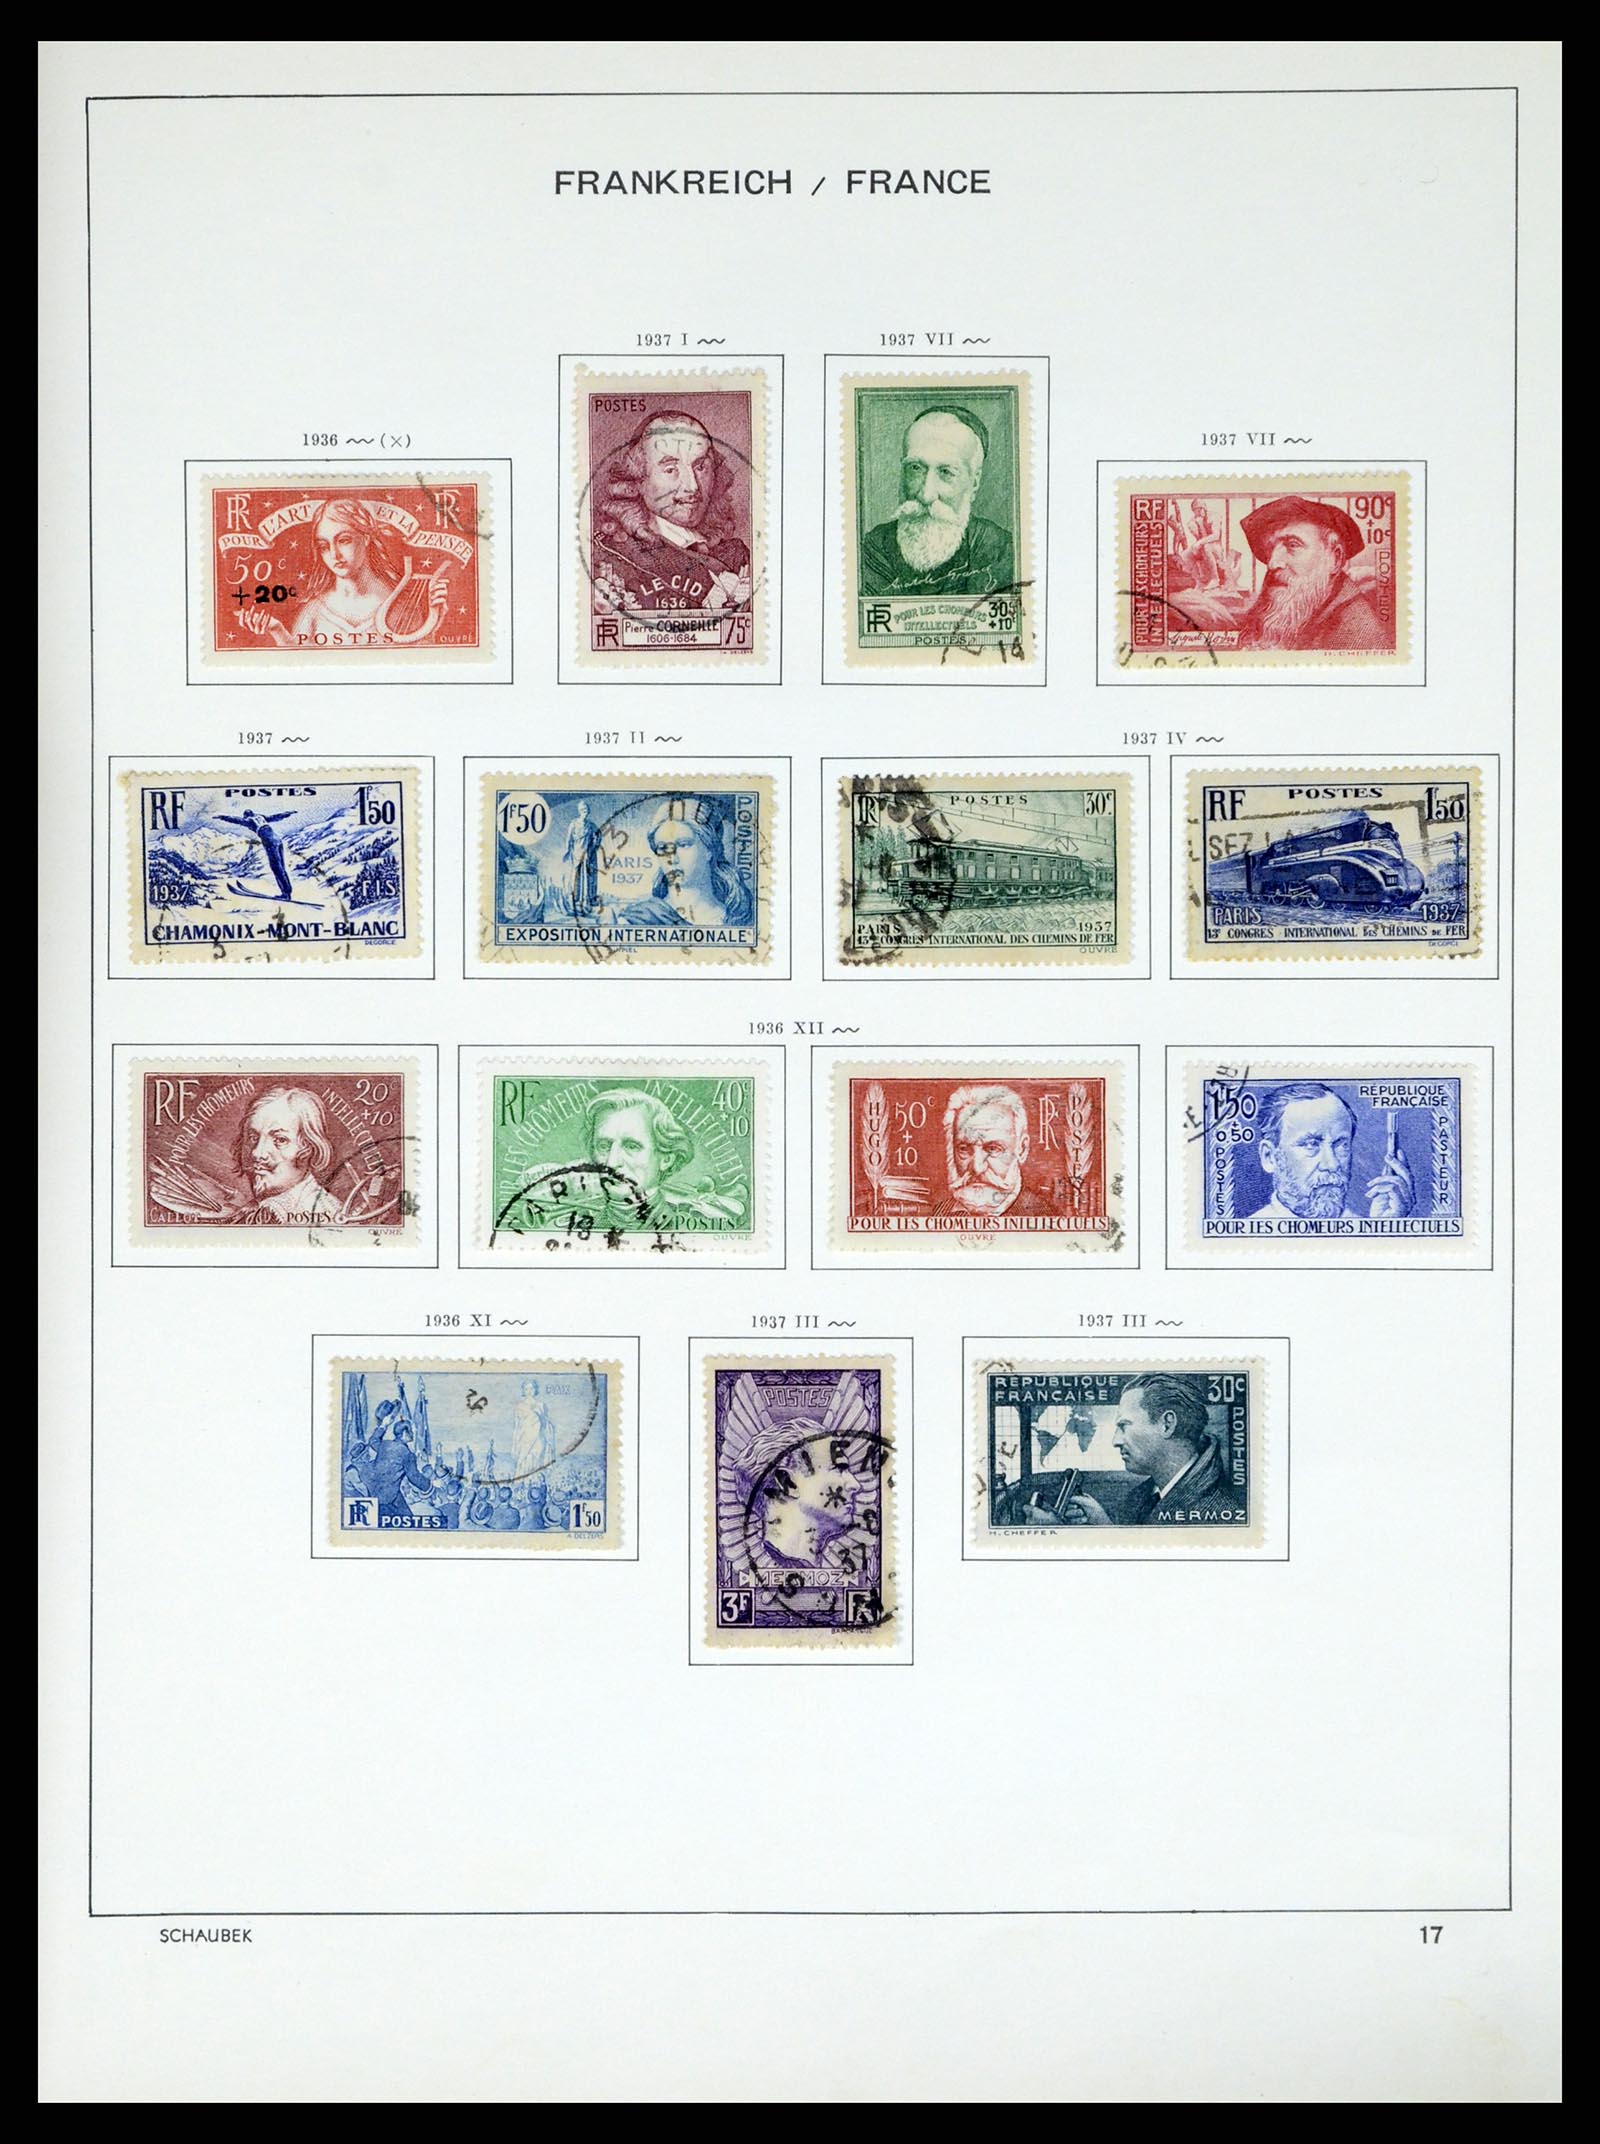 37355 034 - Stamp collection 37355 France 1849-1985.